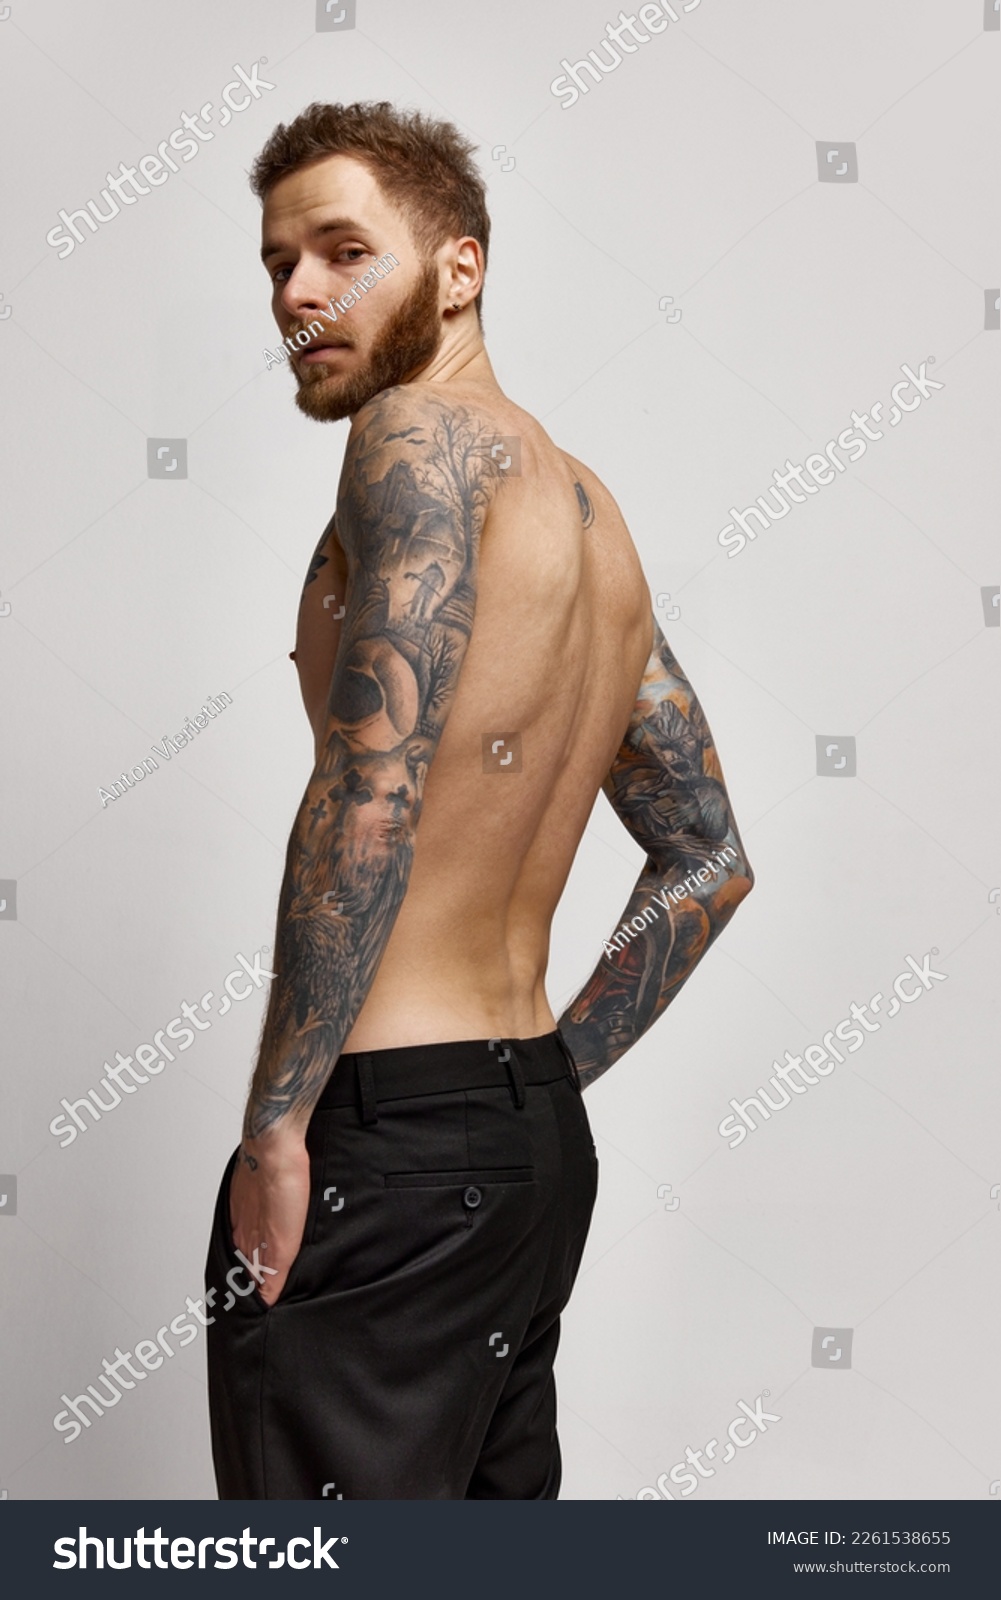 Elegance and courage. Young 30 years old man posing shirtless. Perfect muscular body shape. Tattoo body art. Concept of fashion, style, body aesthetics, beauty, men's health. #2261538655